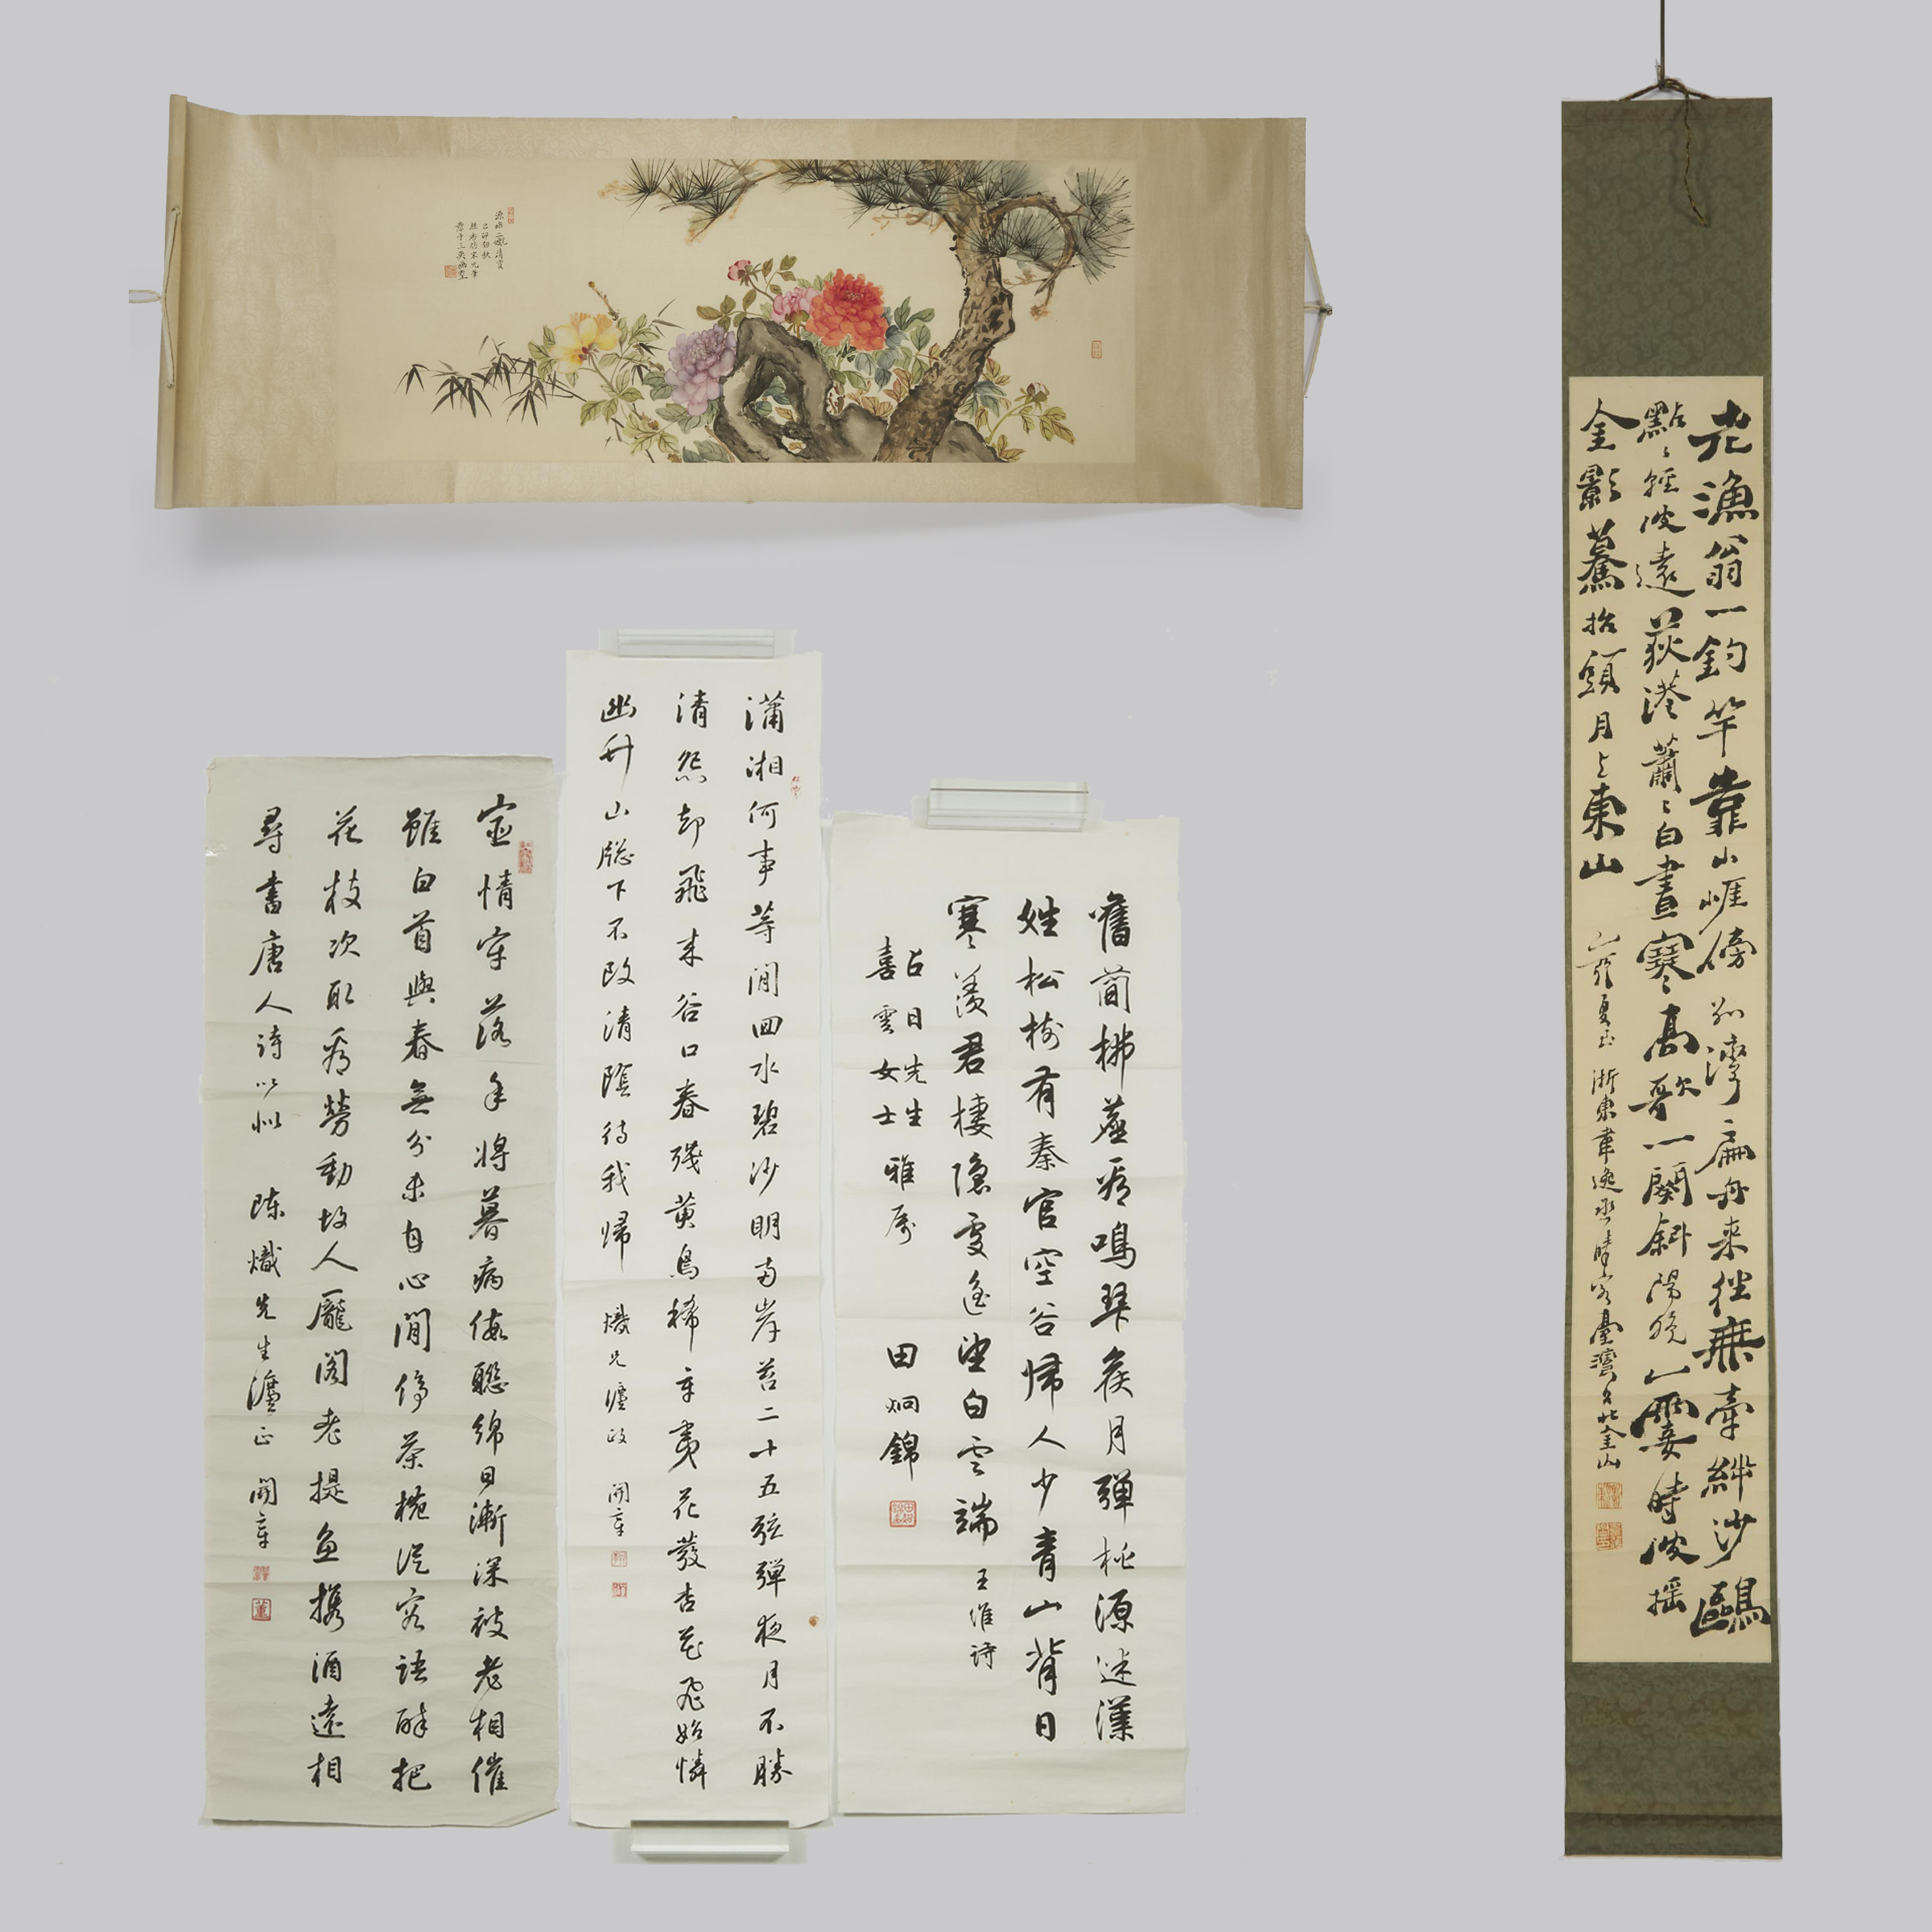 Various Artists, A Group of Eight Works of Chinese Calligraphy, 20th Century